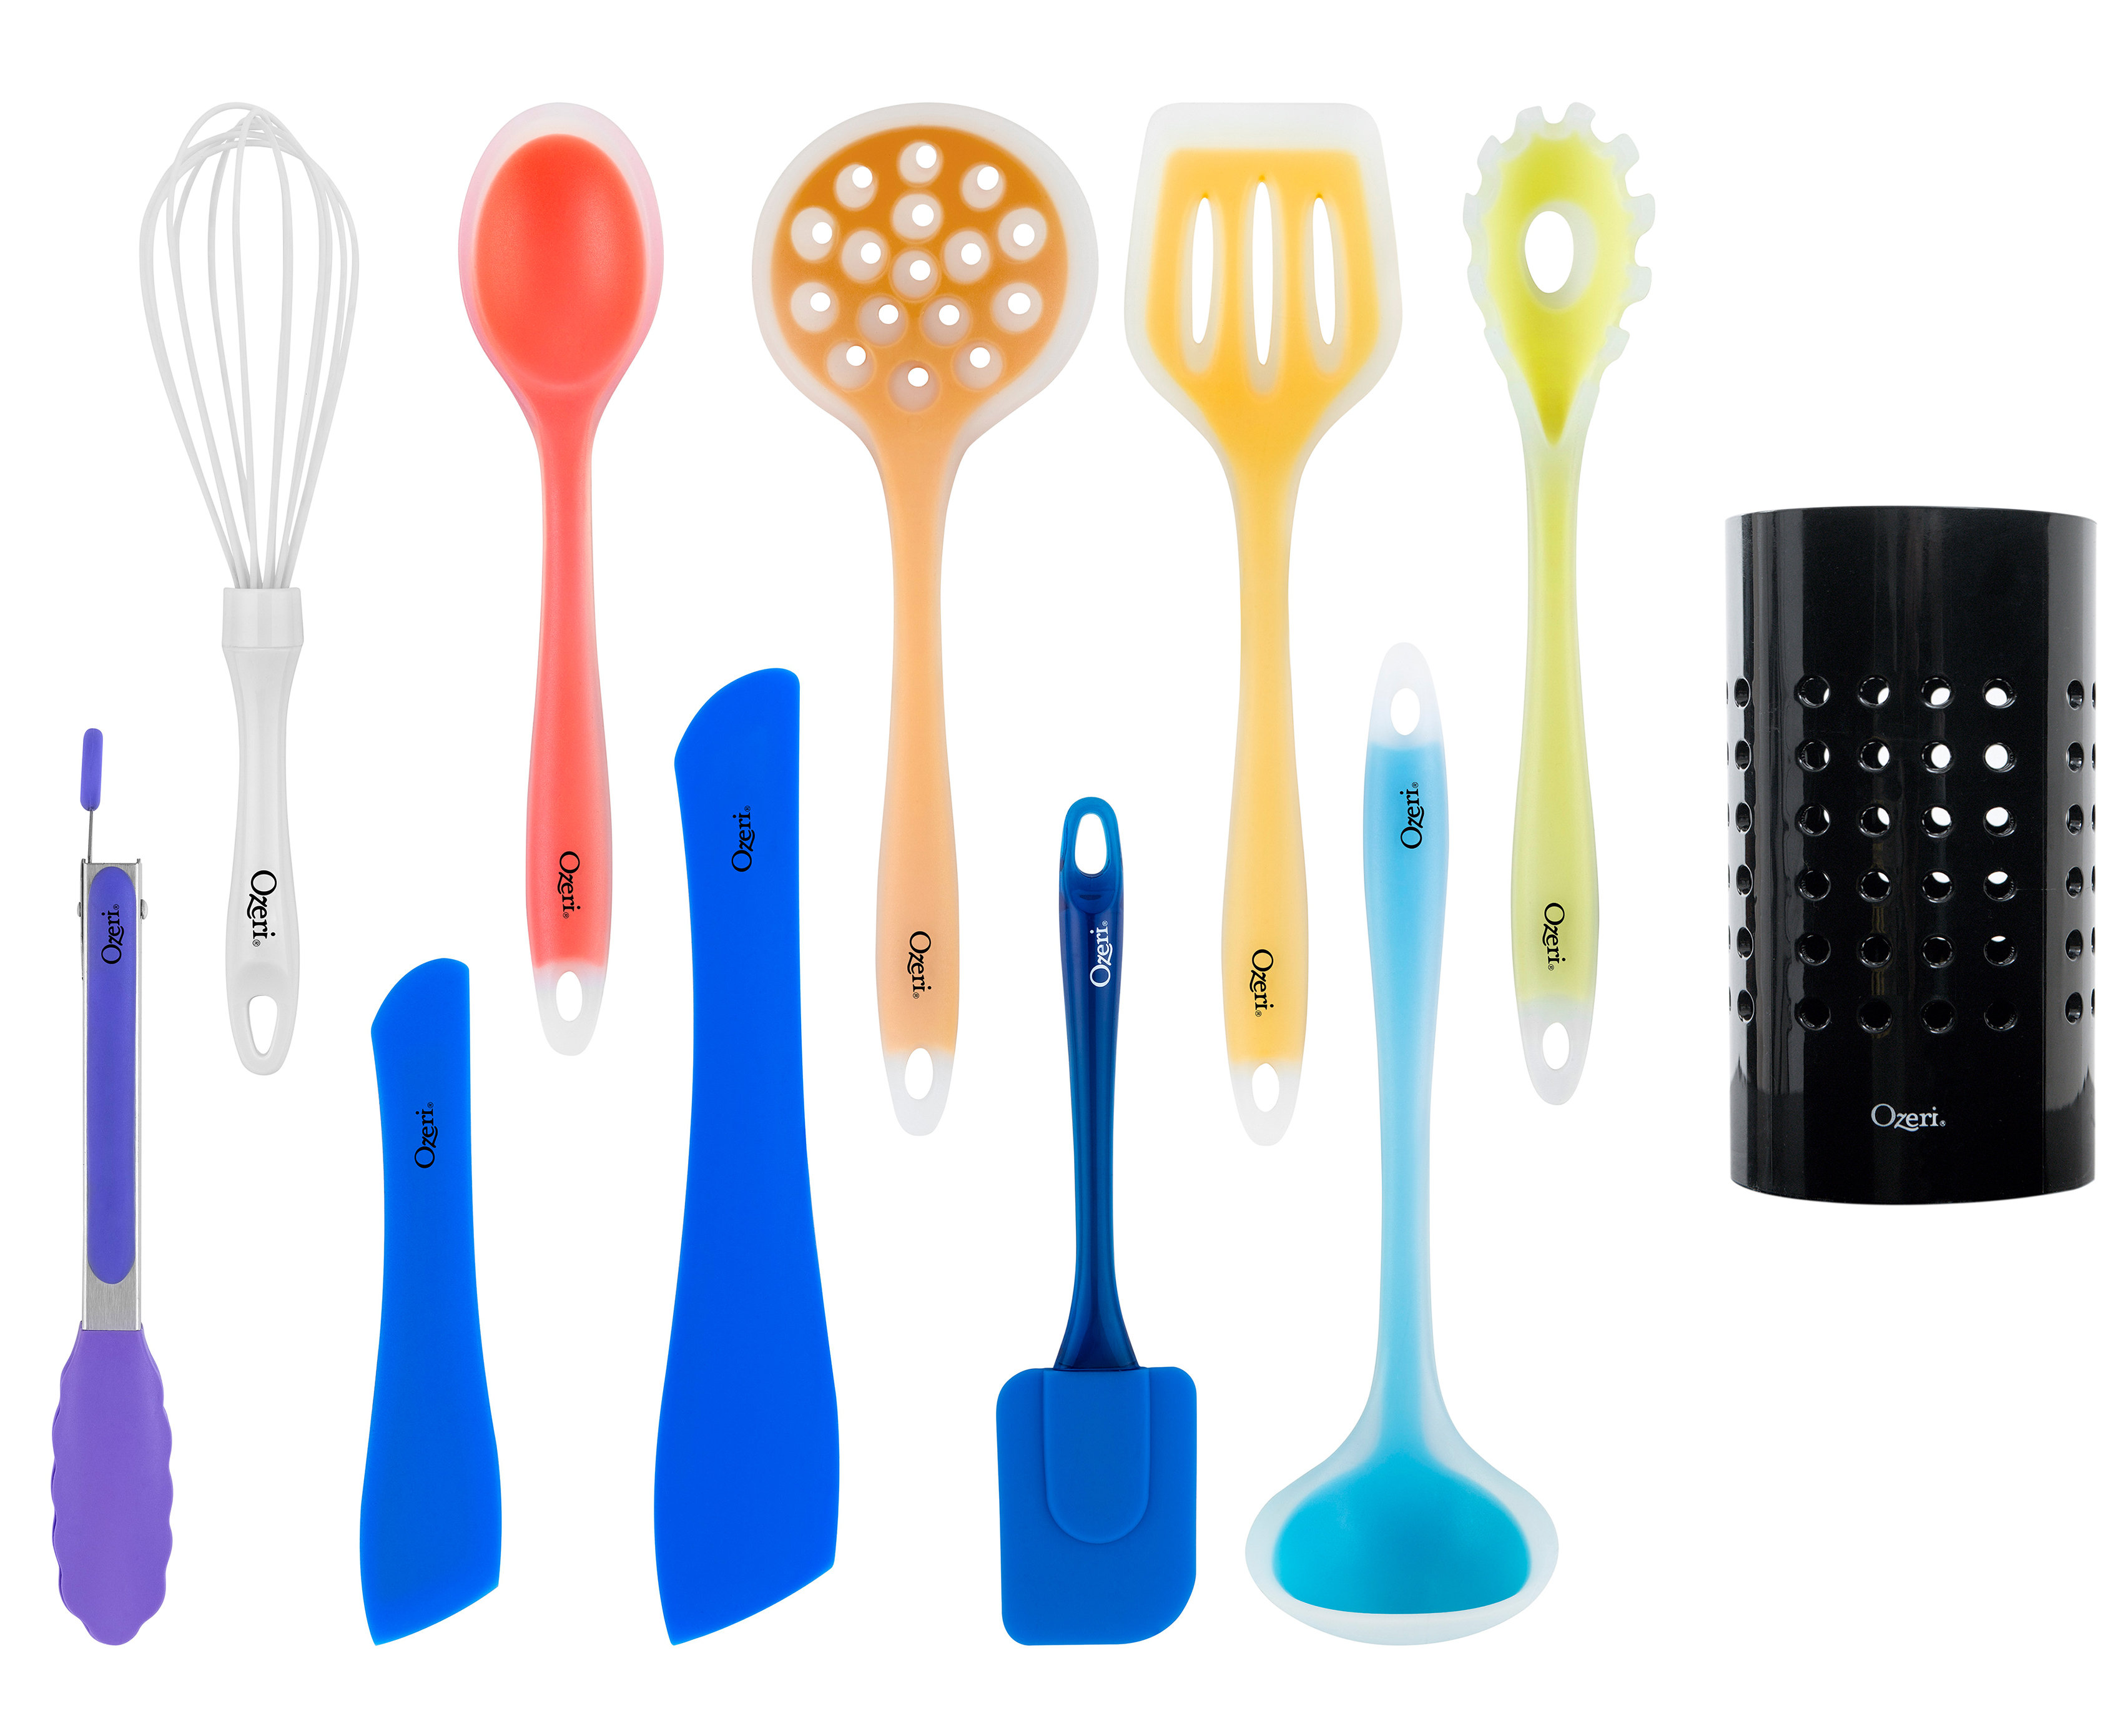 Core Kitchen - 10 Piece Silicone Utensil Set in Assorted Colors